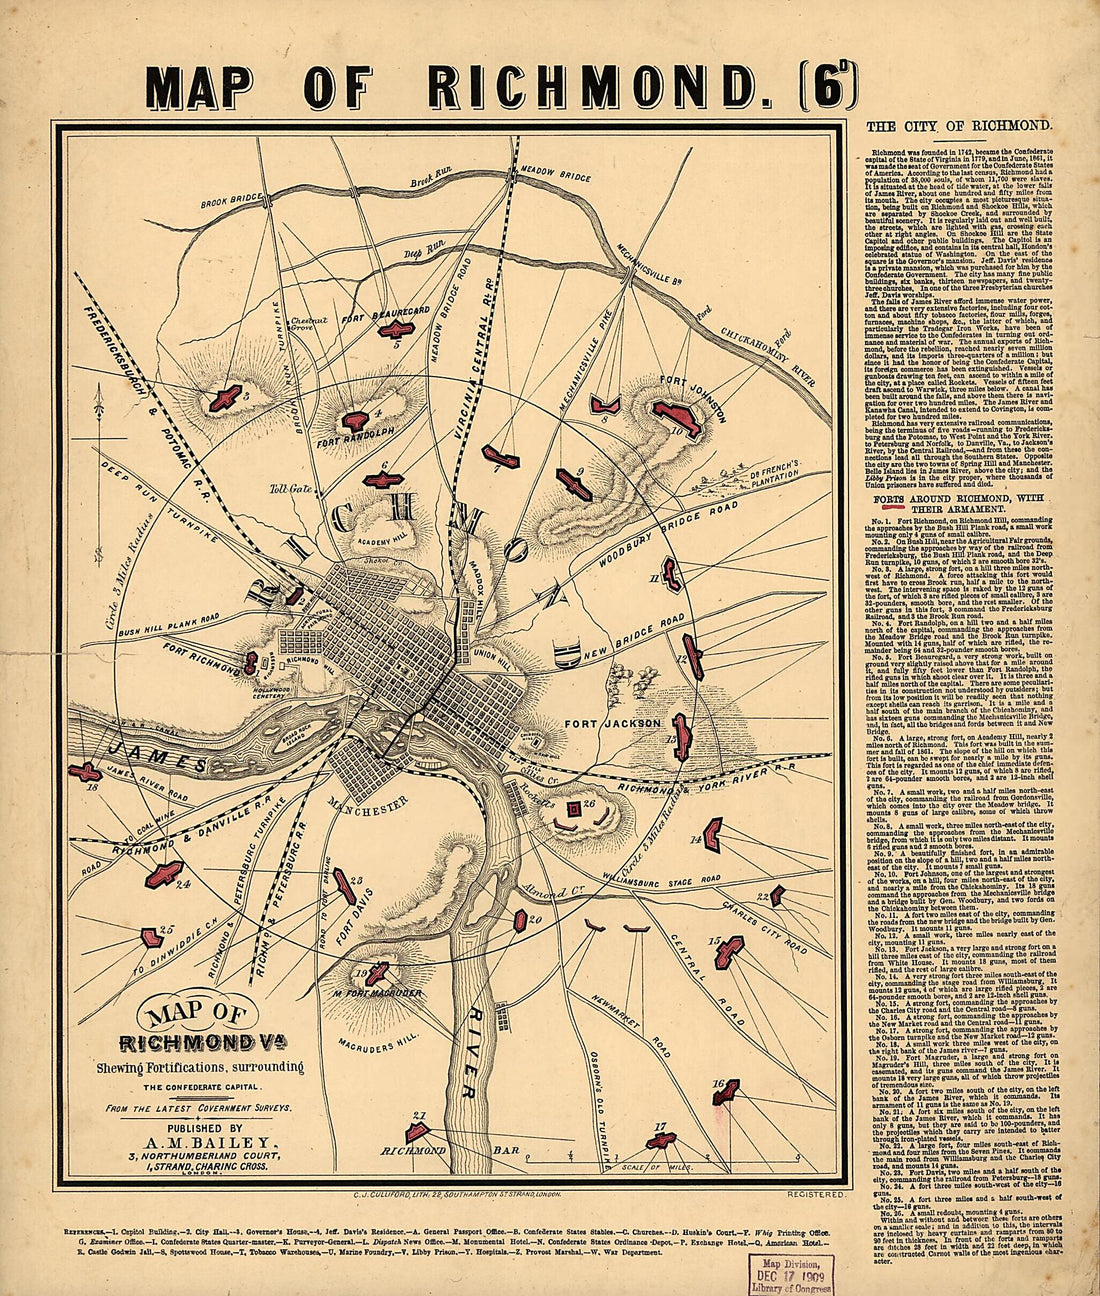 This old map of Map of Richmond, Va., Shewing Fortifications Surrounding the Confederate Capital. from the Latest Government Surveys from 1860 was created by A. M. Bailey in 1860